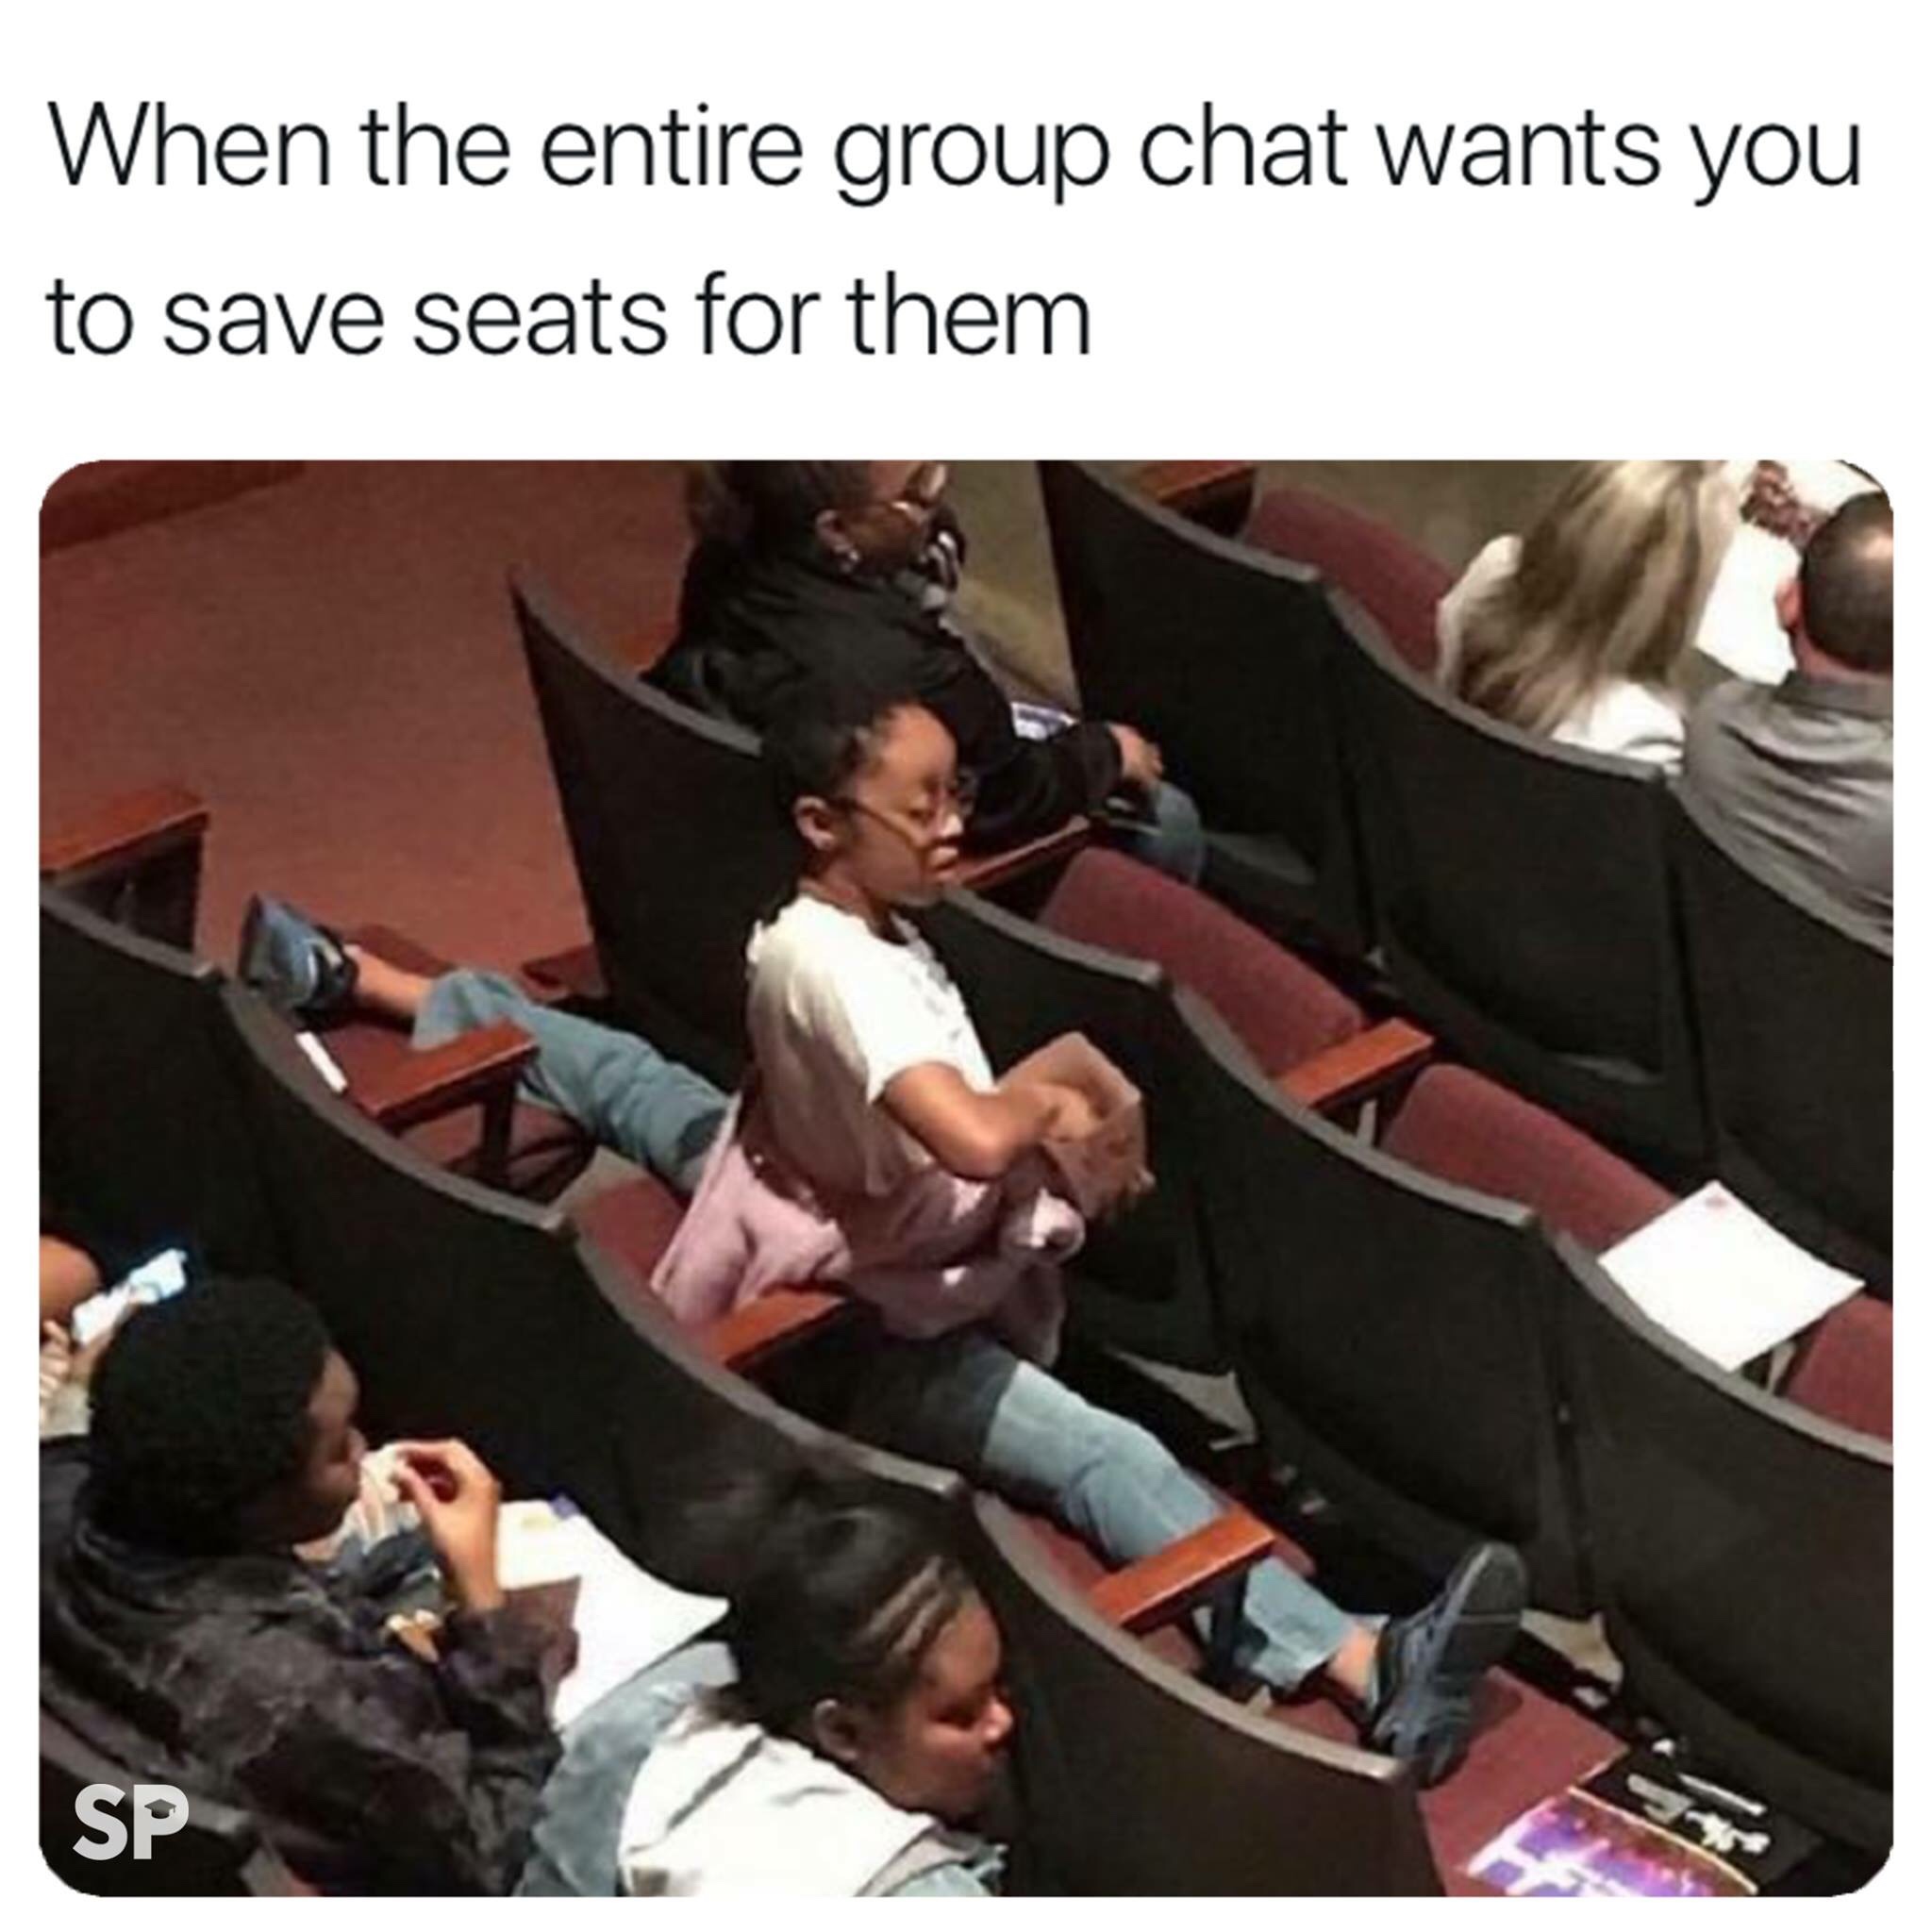 save seats meme - When the entire group chat wants you to save seats for them Sp